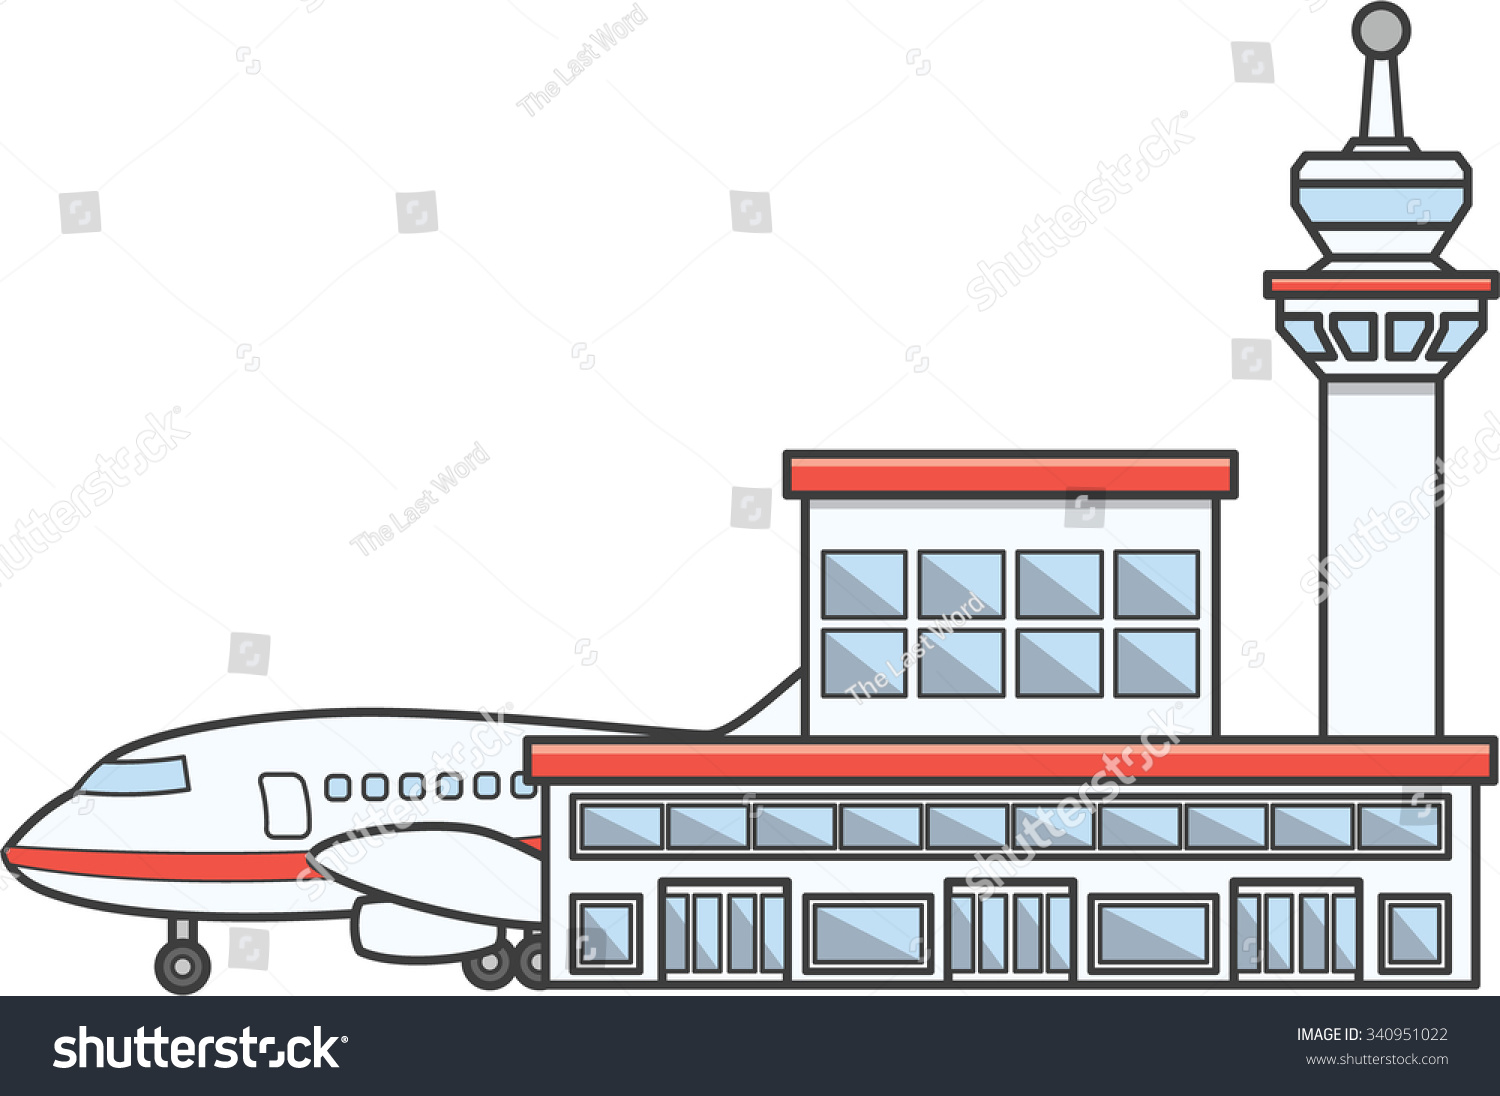 airport safety clipart - photo #22